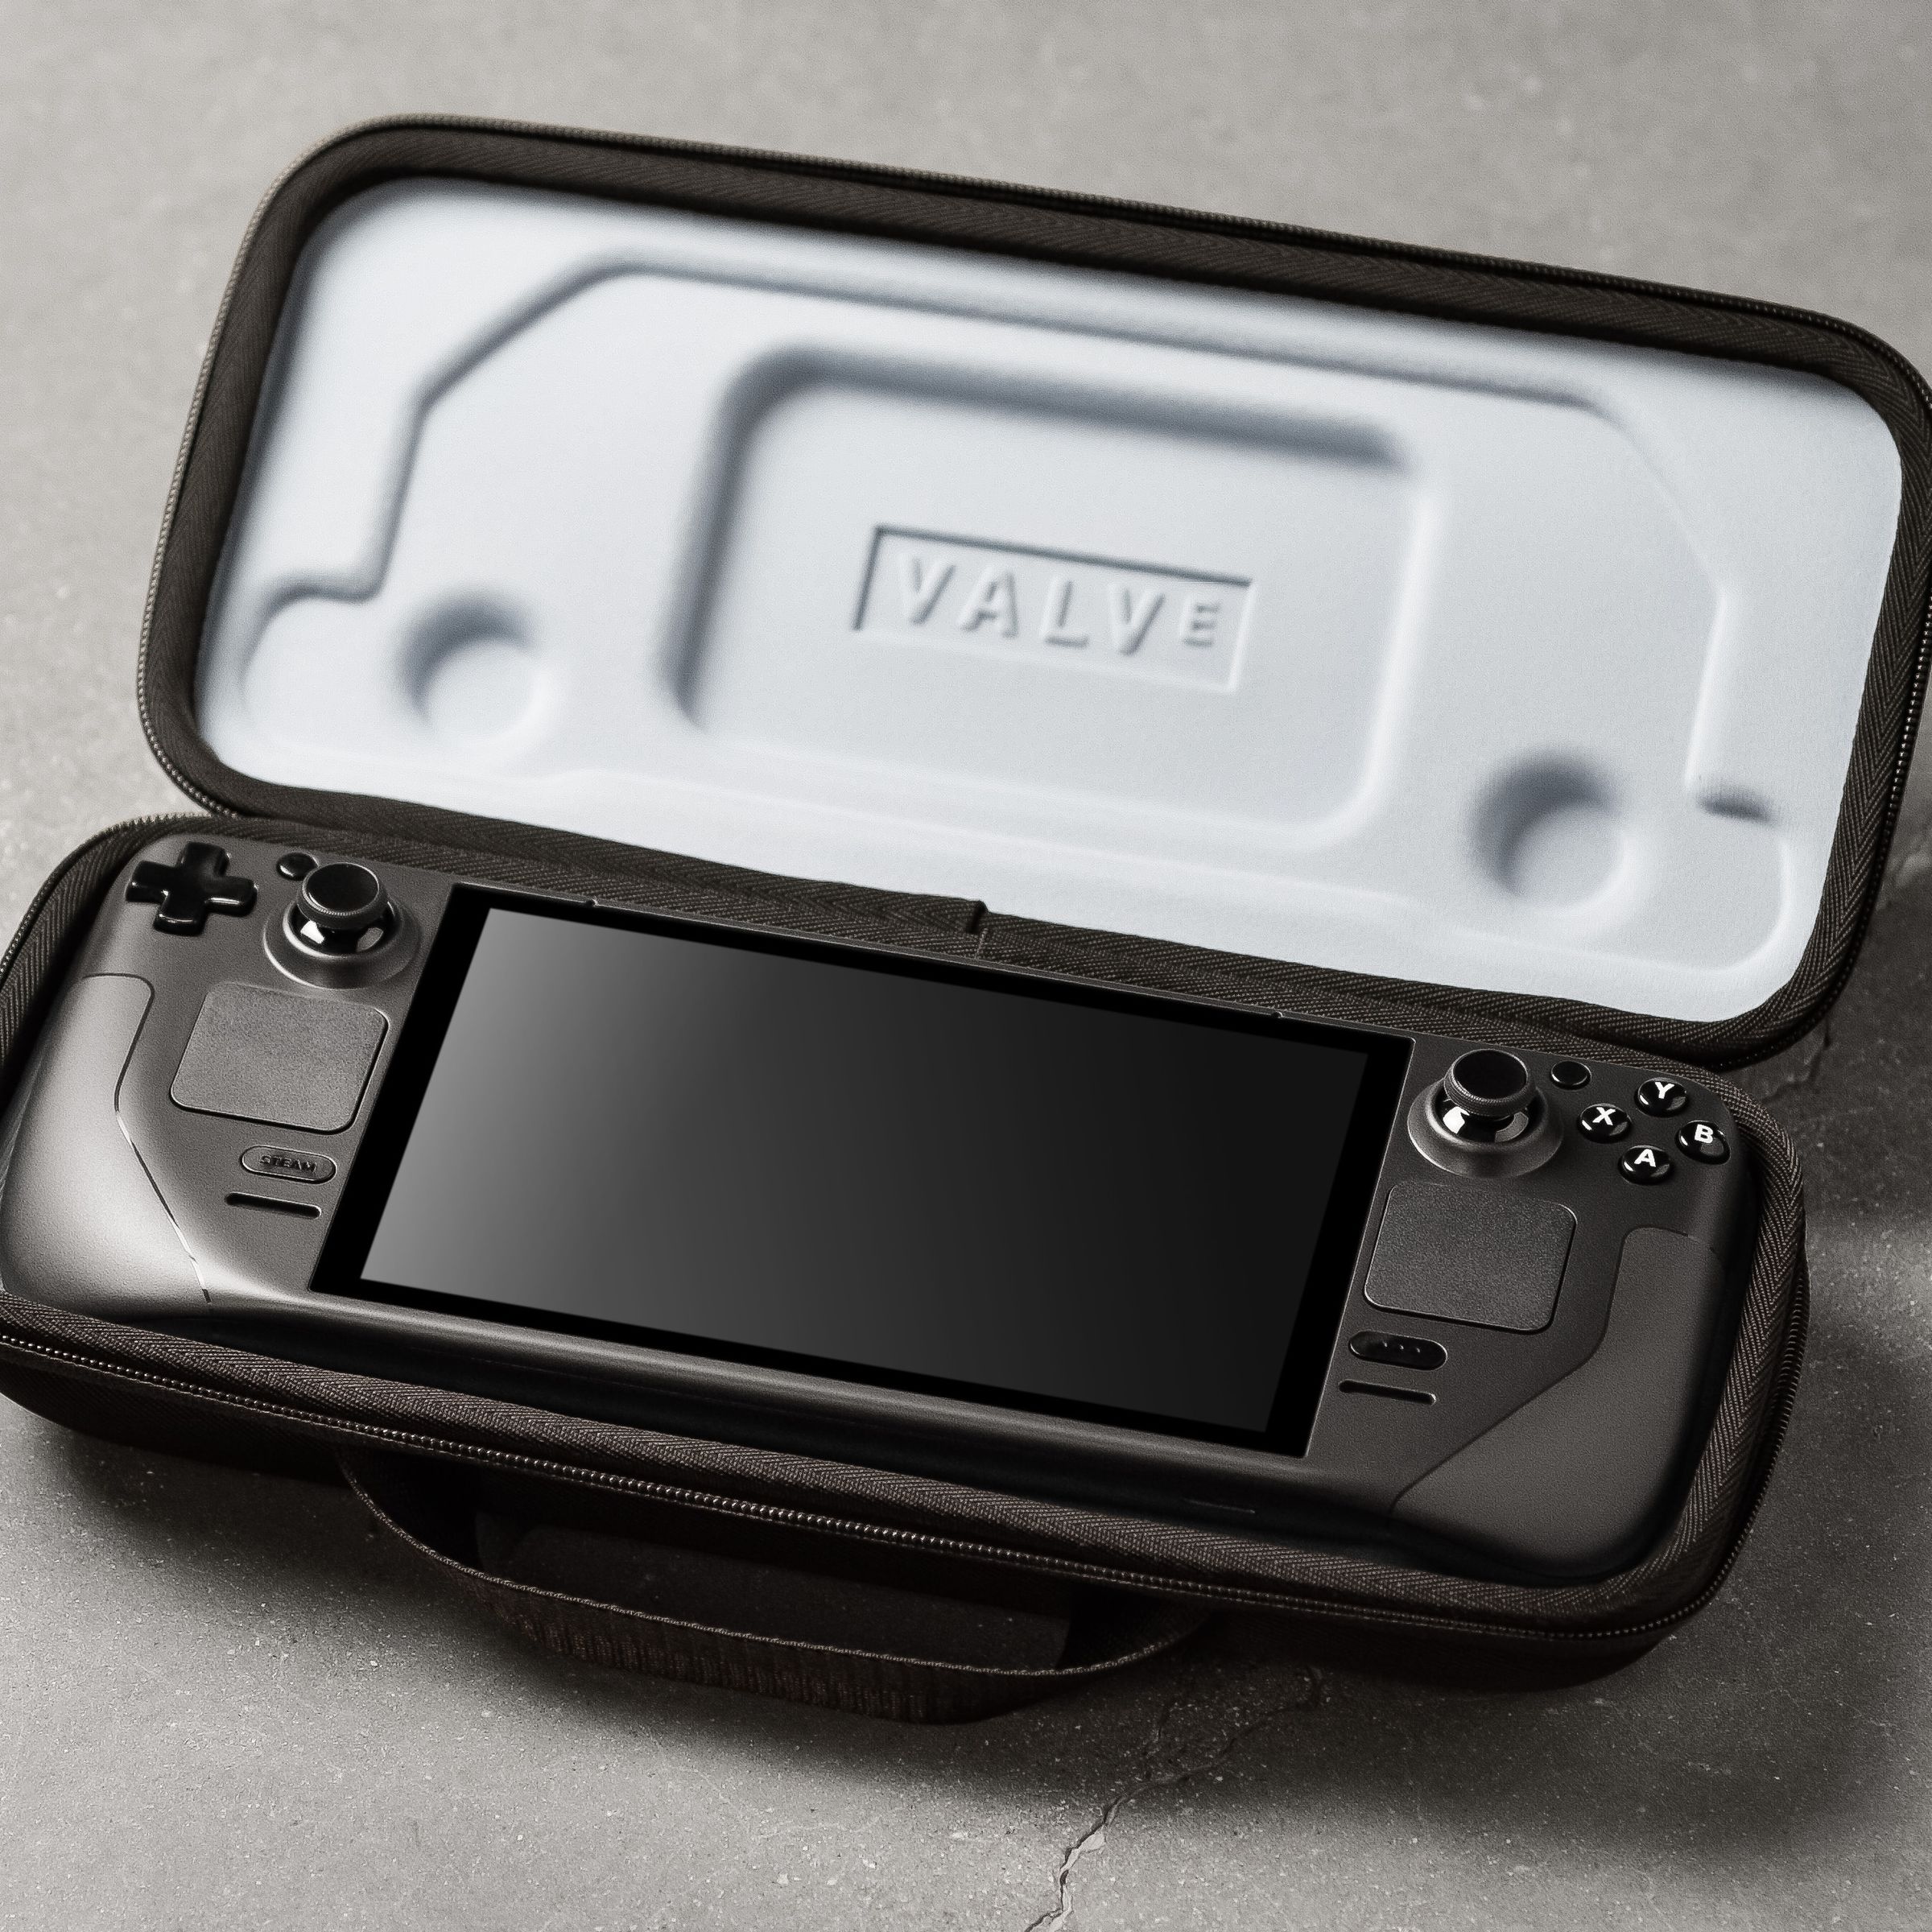 Valve’s Steam Deck and its carrying case.